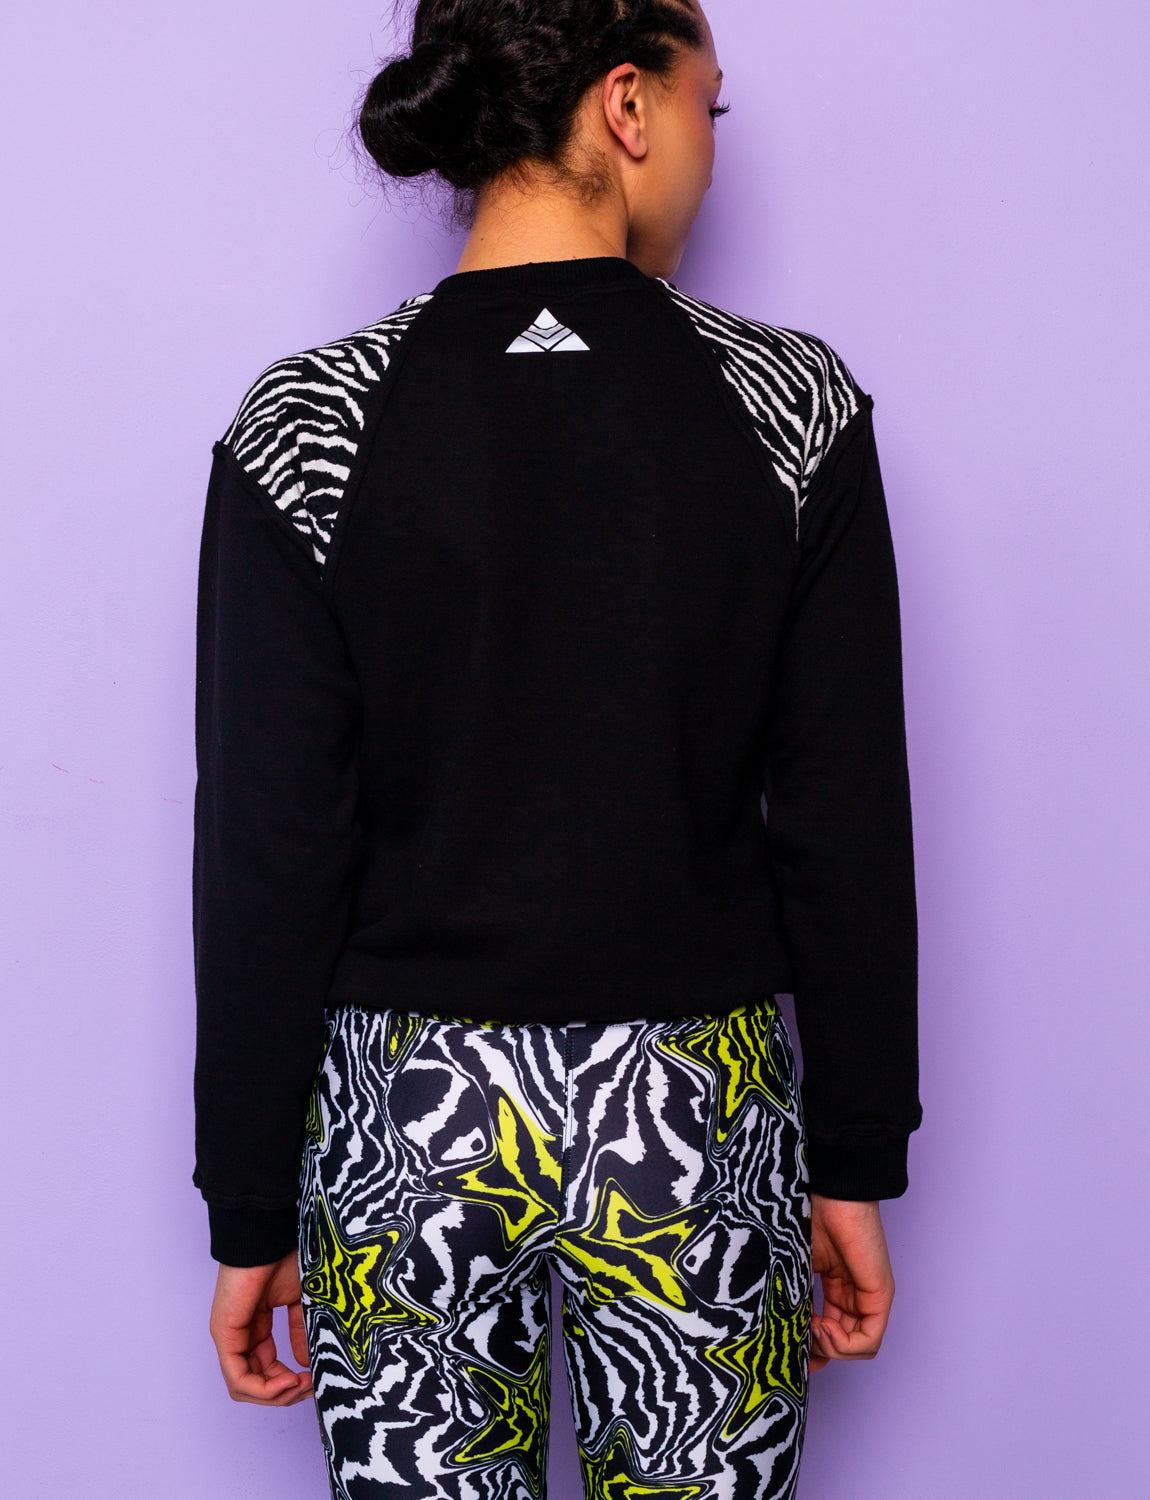 back of a woman wearing a black sweatshirt with black and white zebra print shoulders